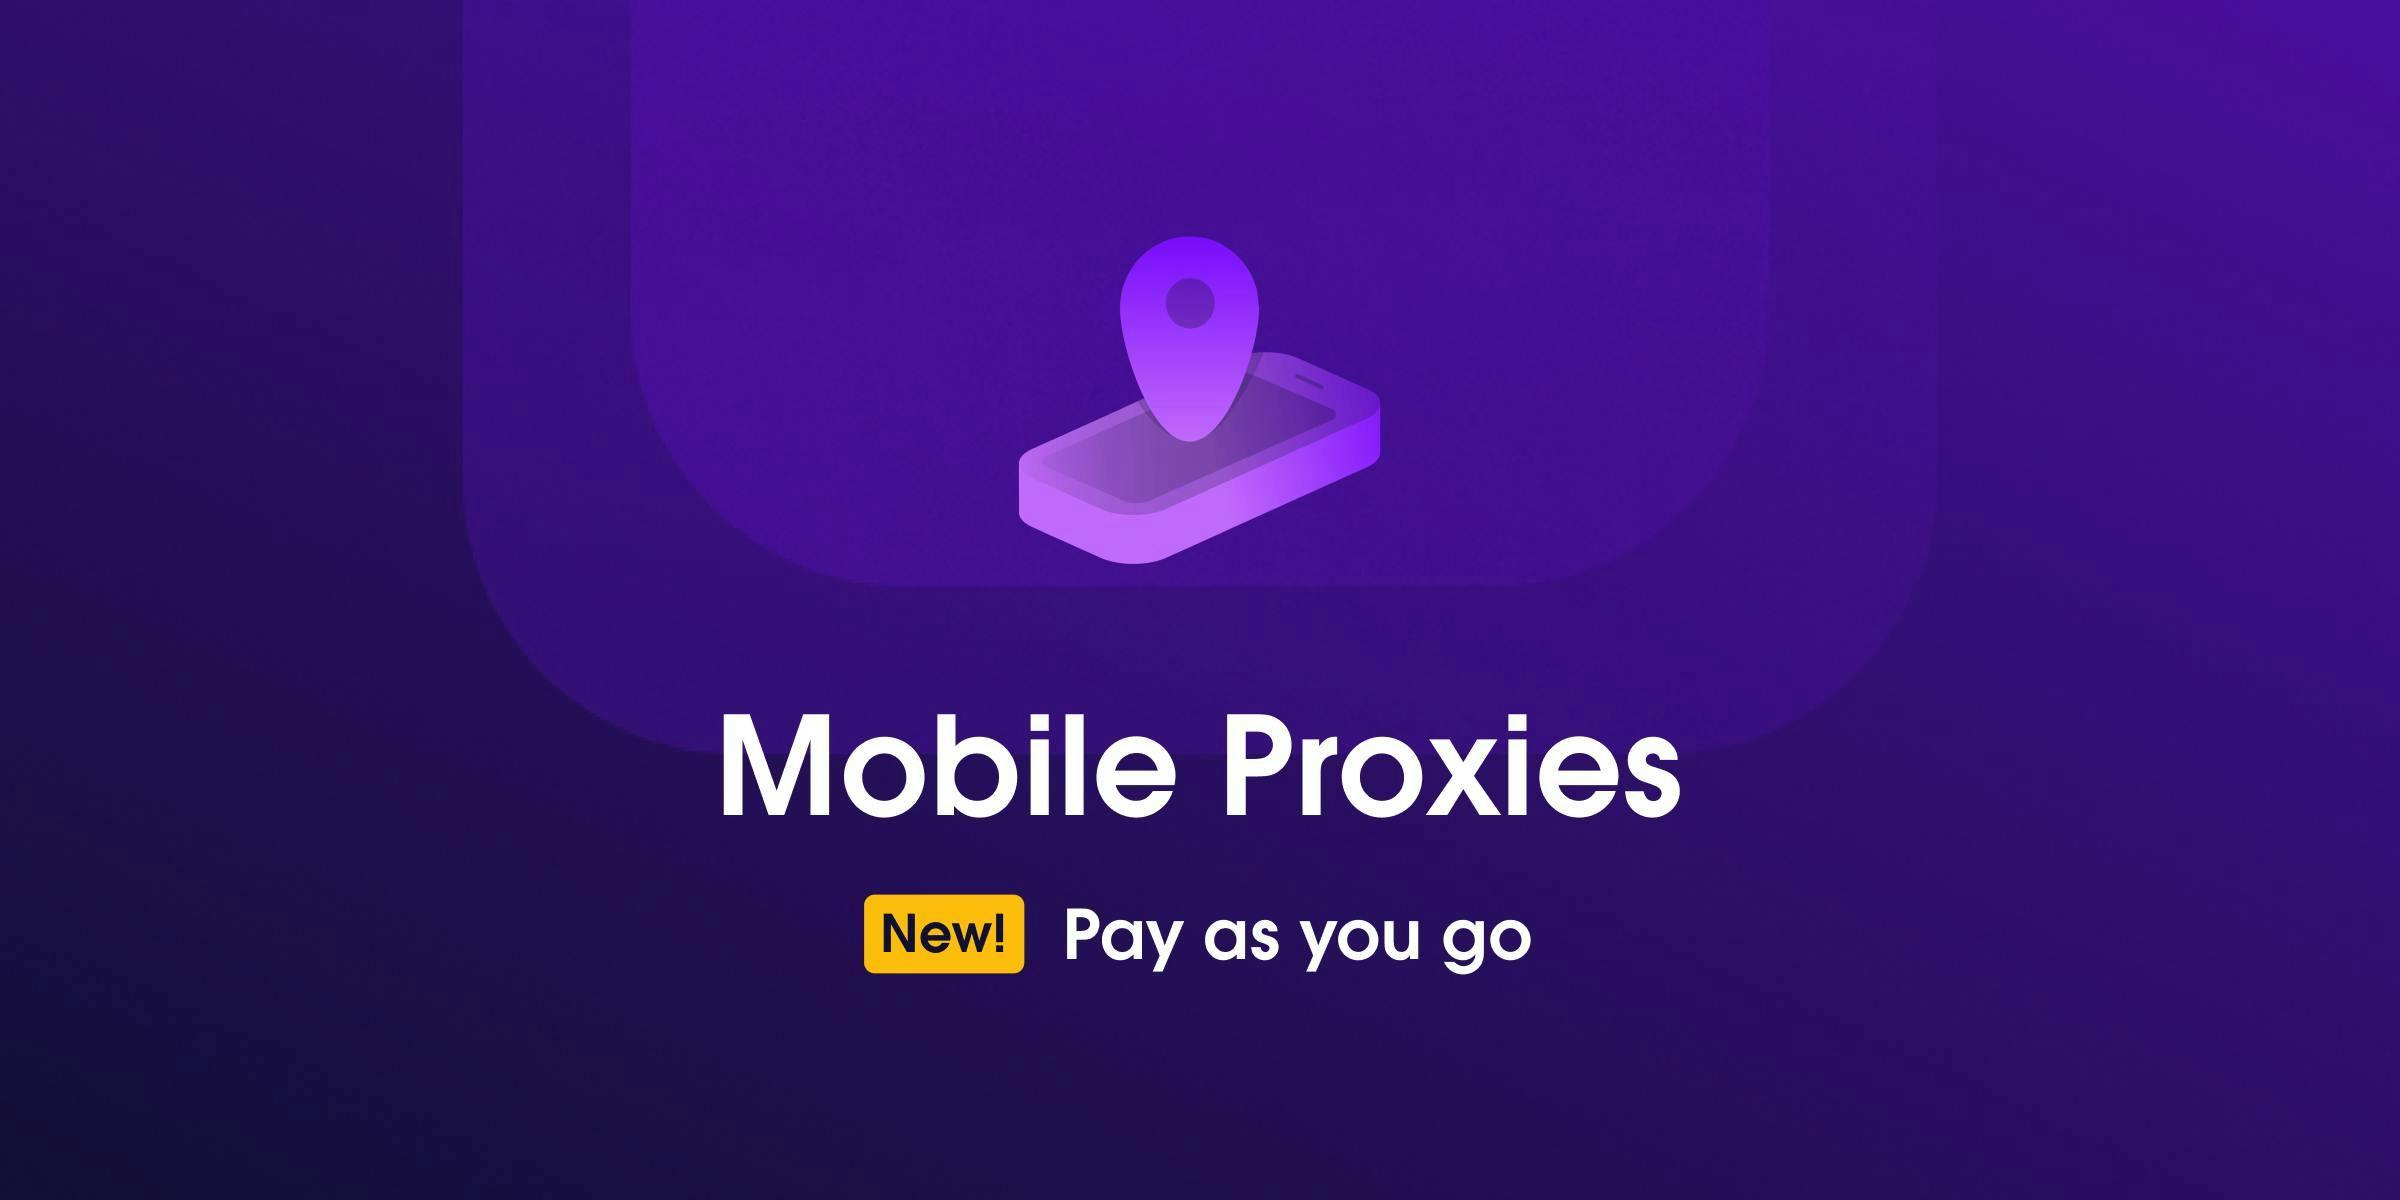 Mobile Proxies in Self-Service